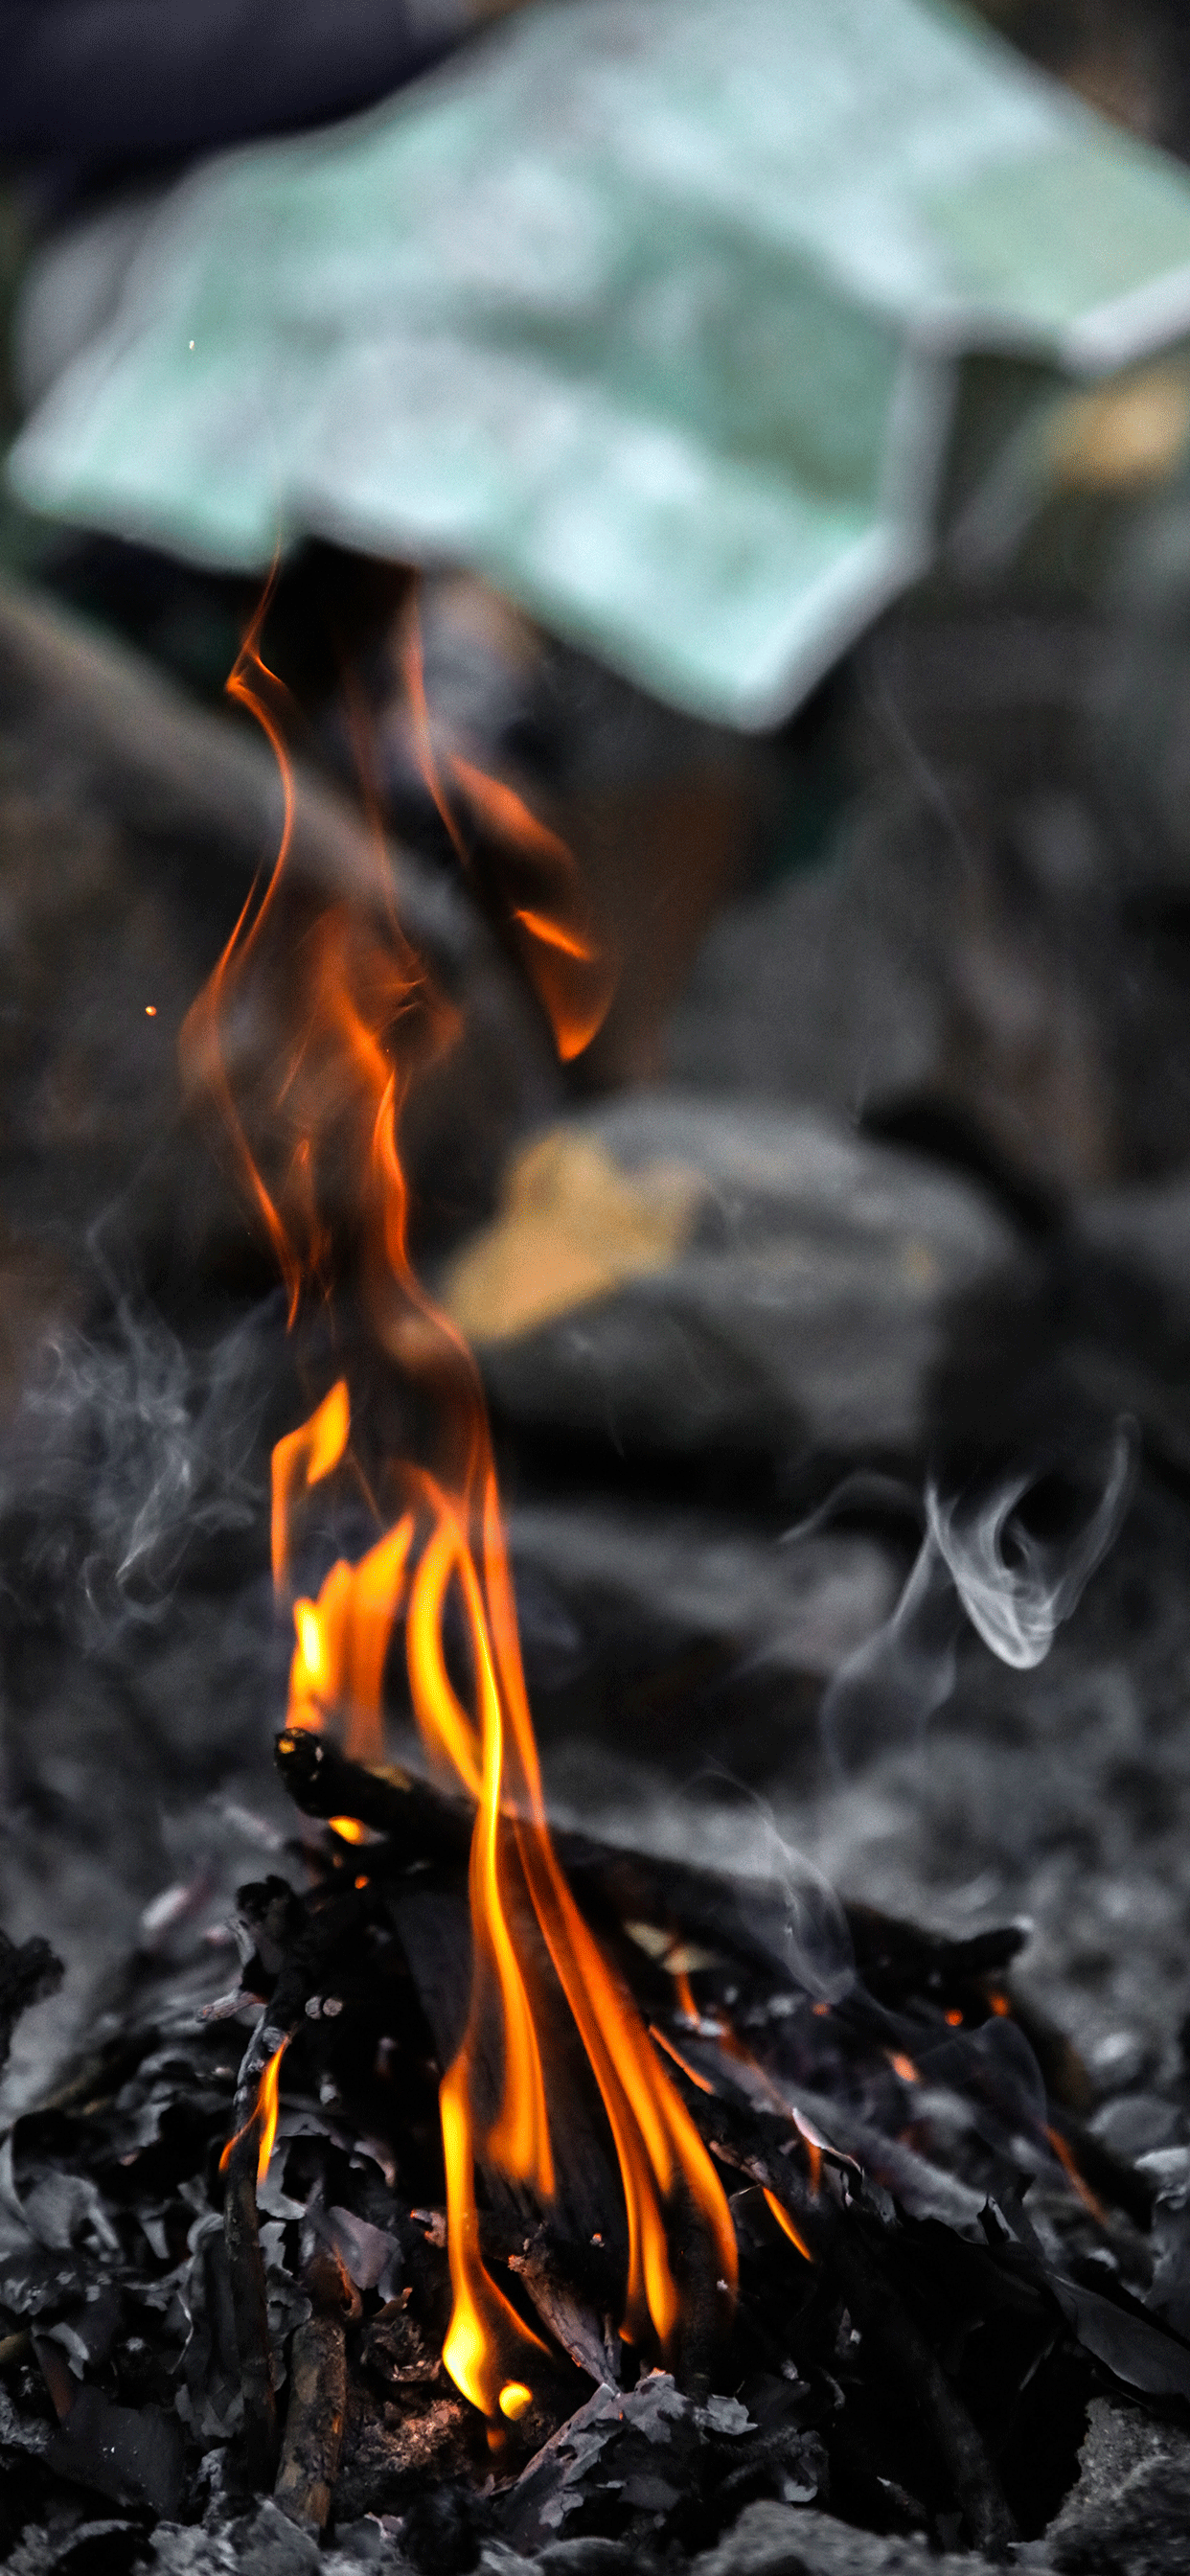 Fireplace Iphone Wallpapers Top Free Fireplace Iphone Backgrounds Wallpaperaccess